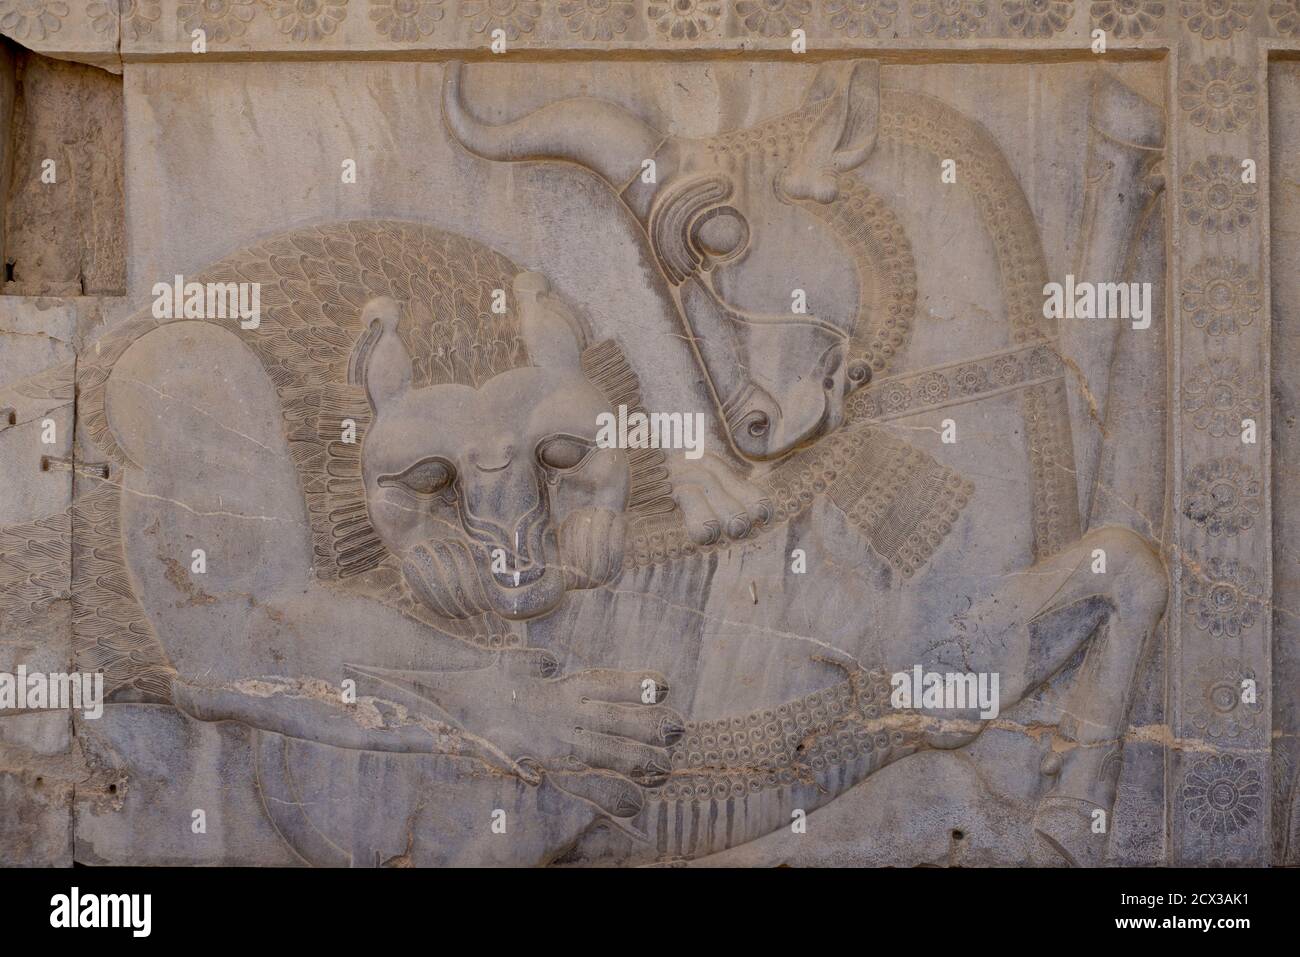 Apadana palace ruins and bas reliefs, Persepolis, Iran. Lion biting the bull. Relief depicting the symbolic coming of spring and the Nowruz festivity, through lion (sun) feasting on the bull (earth); Persepolis, Iran. Symbols of submission Stock Photo